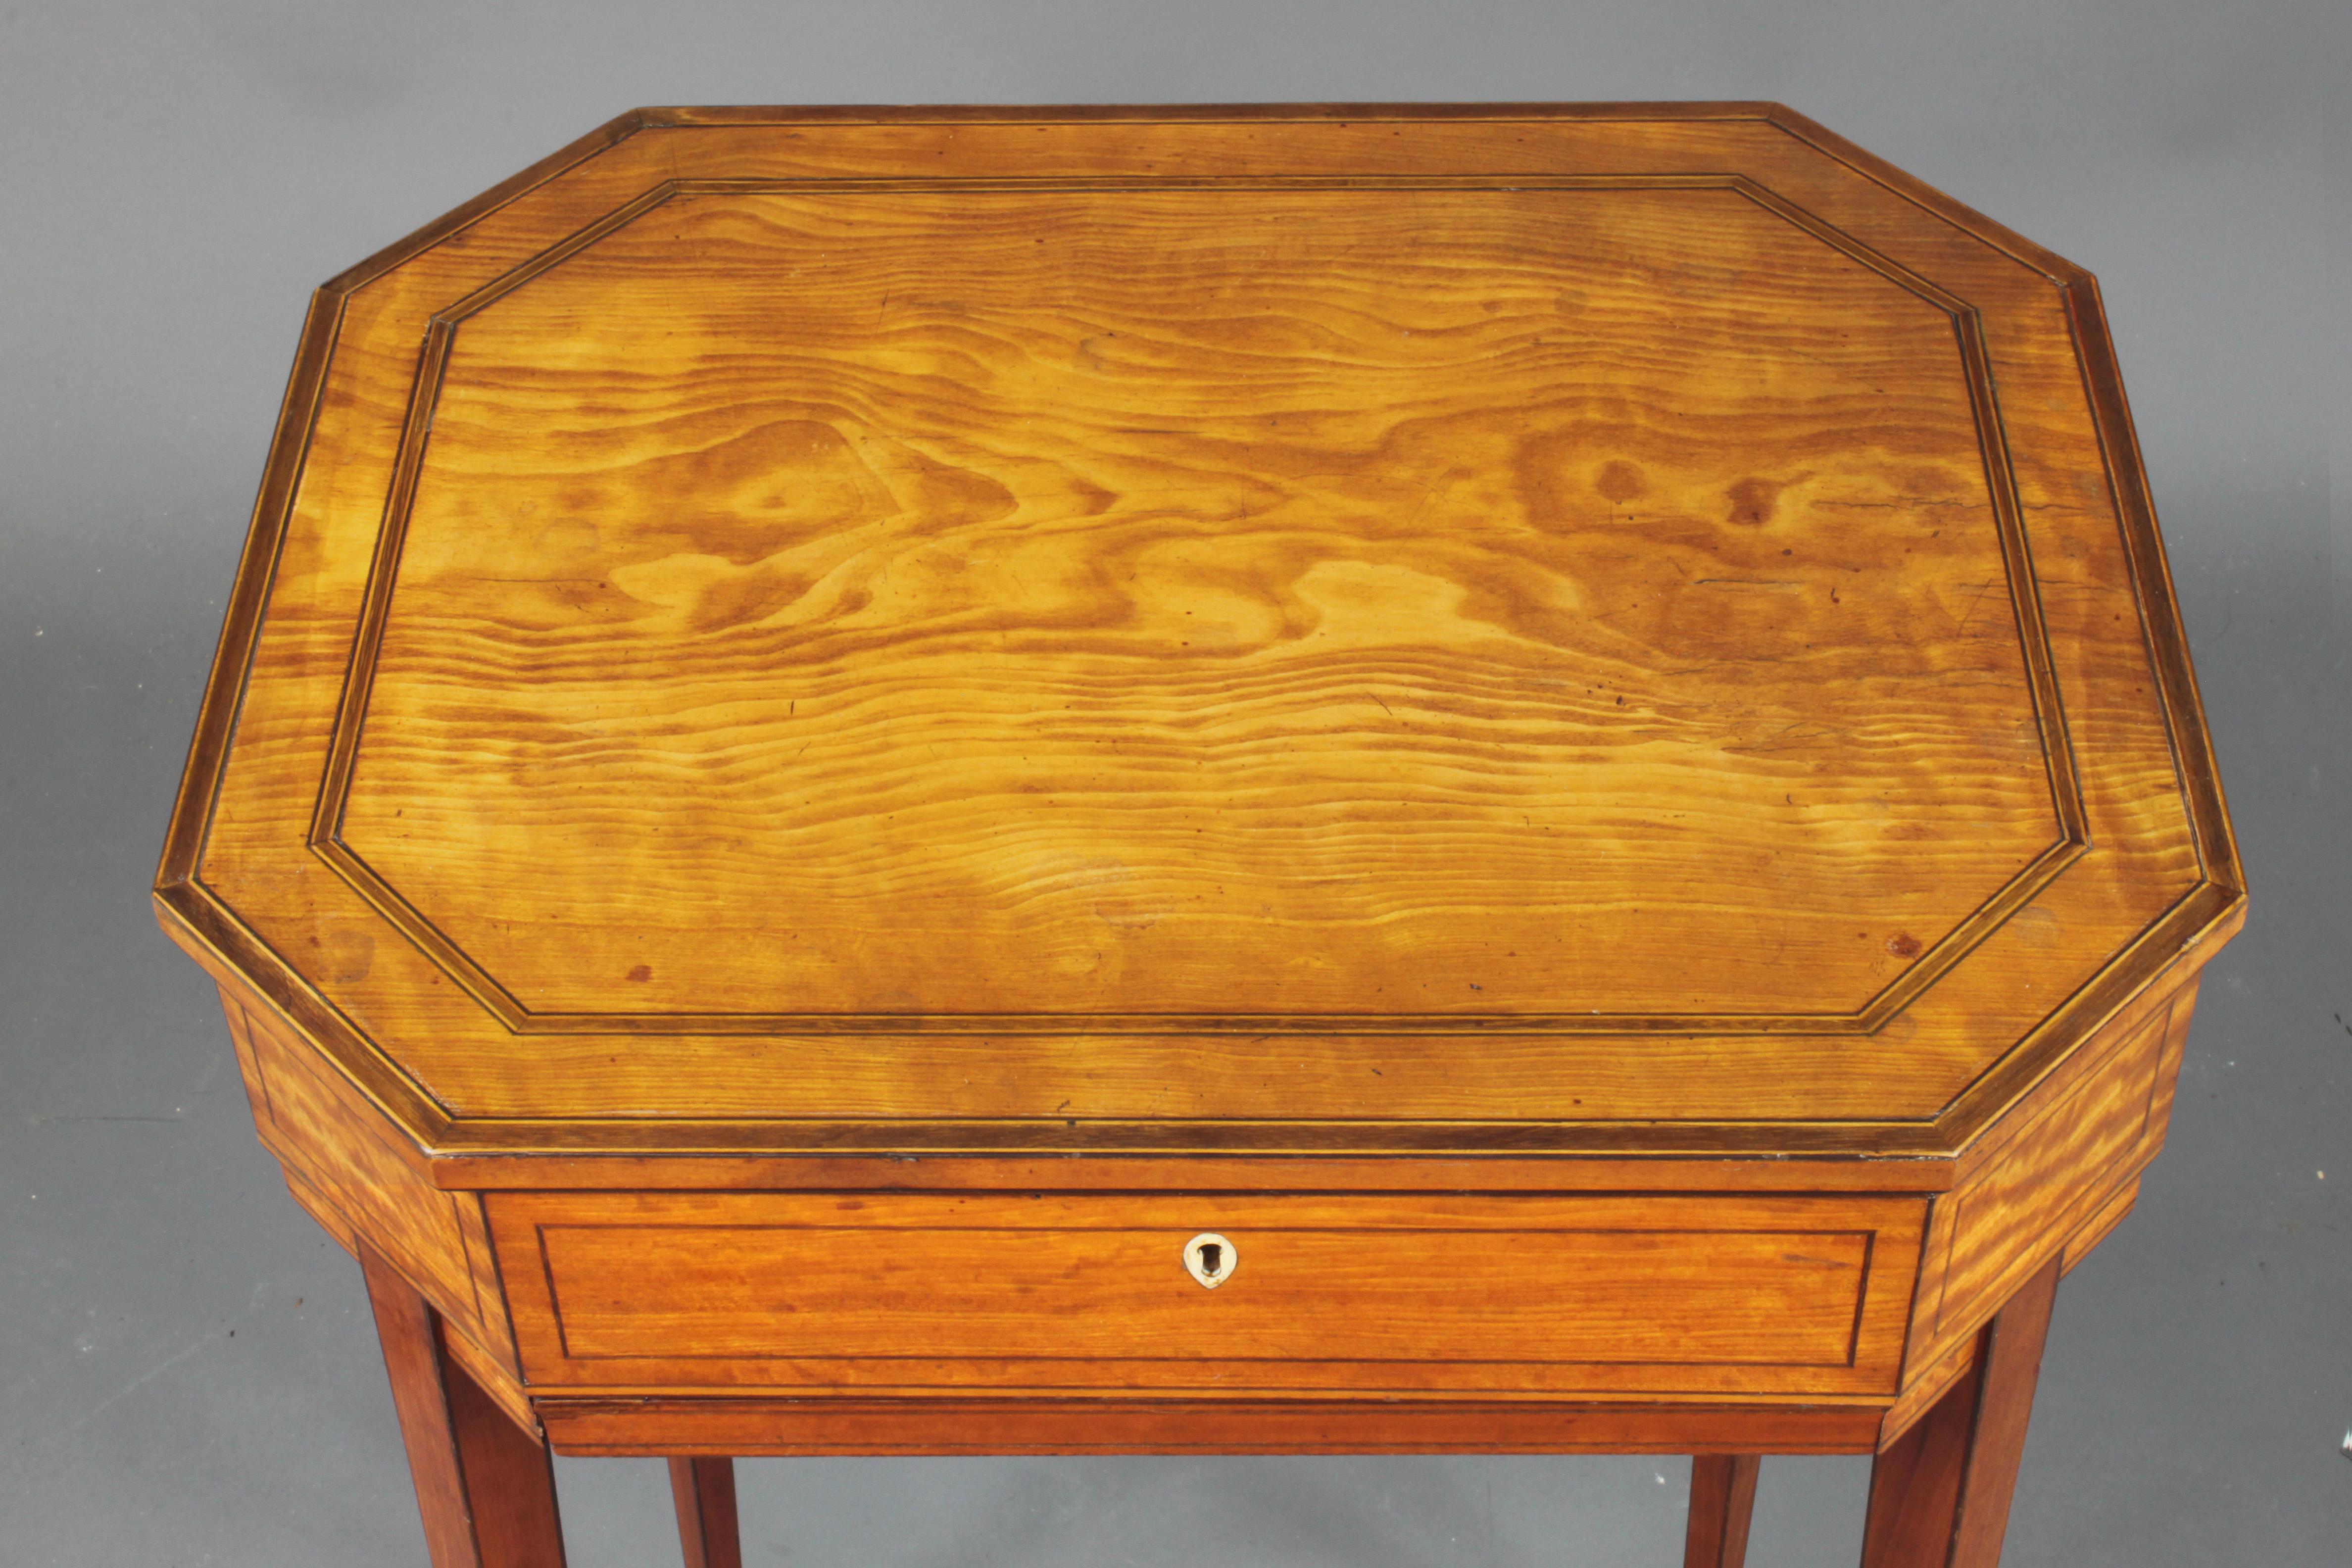 A very elegant small satinwood work table with a crossbanded top and slender tapered legs. The original top frame of the bag underneath has been made into a slide.